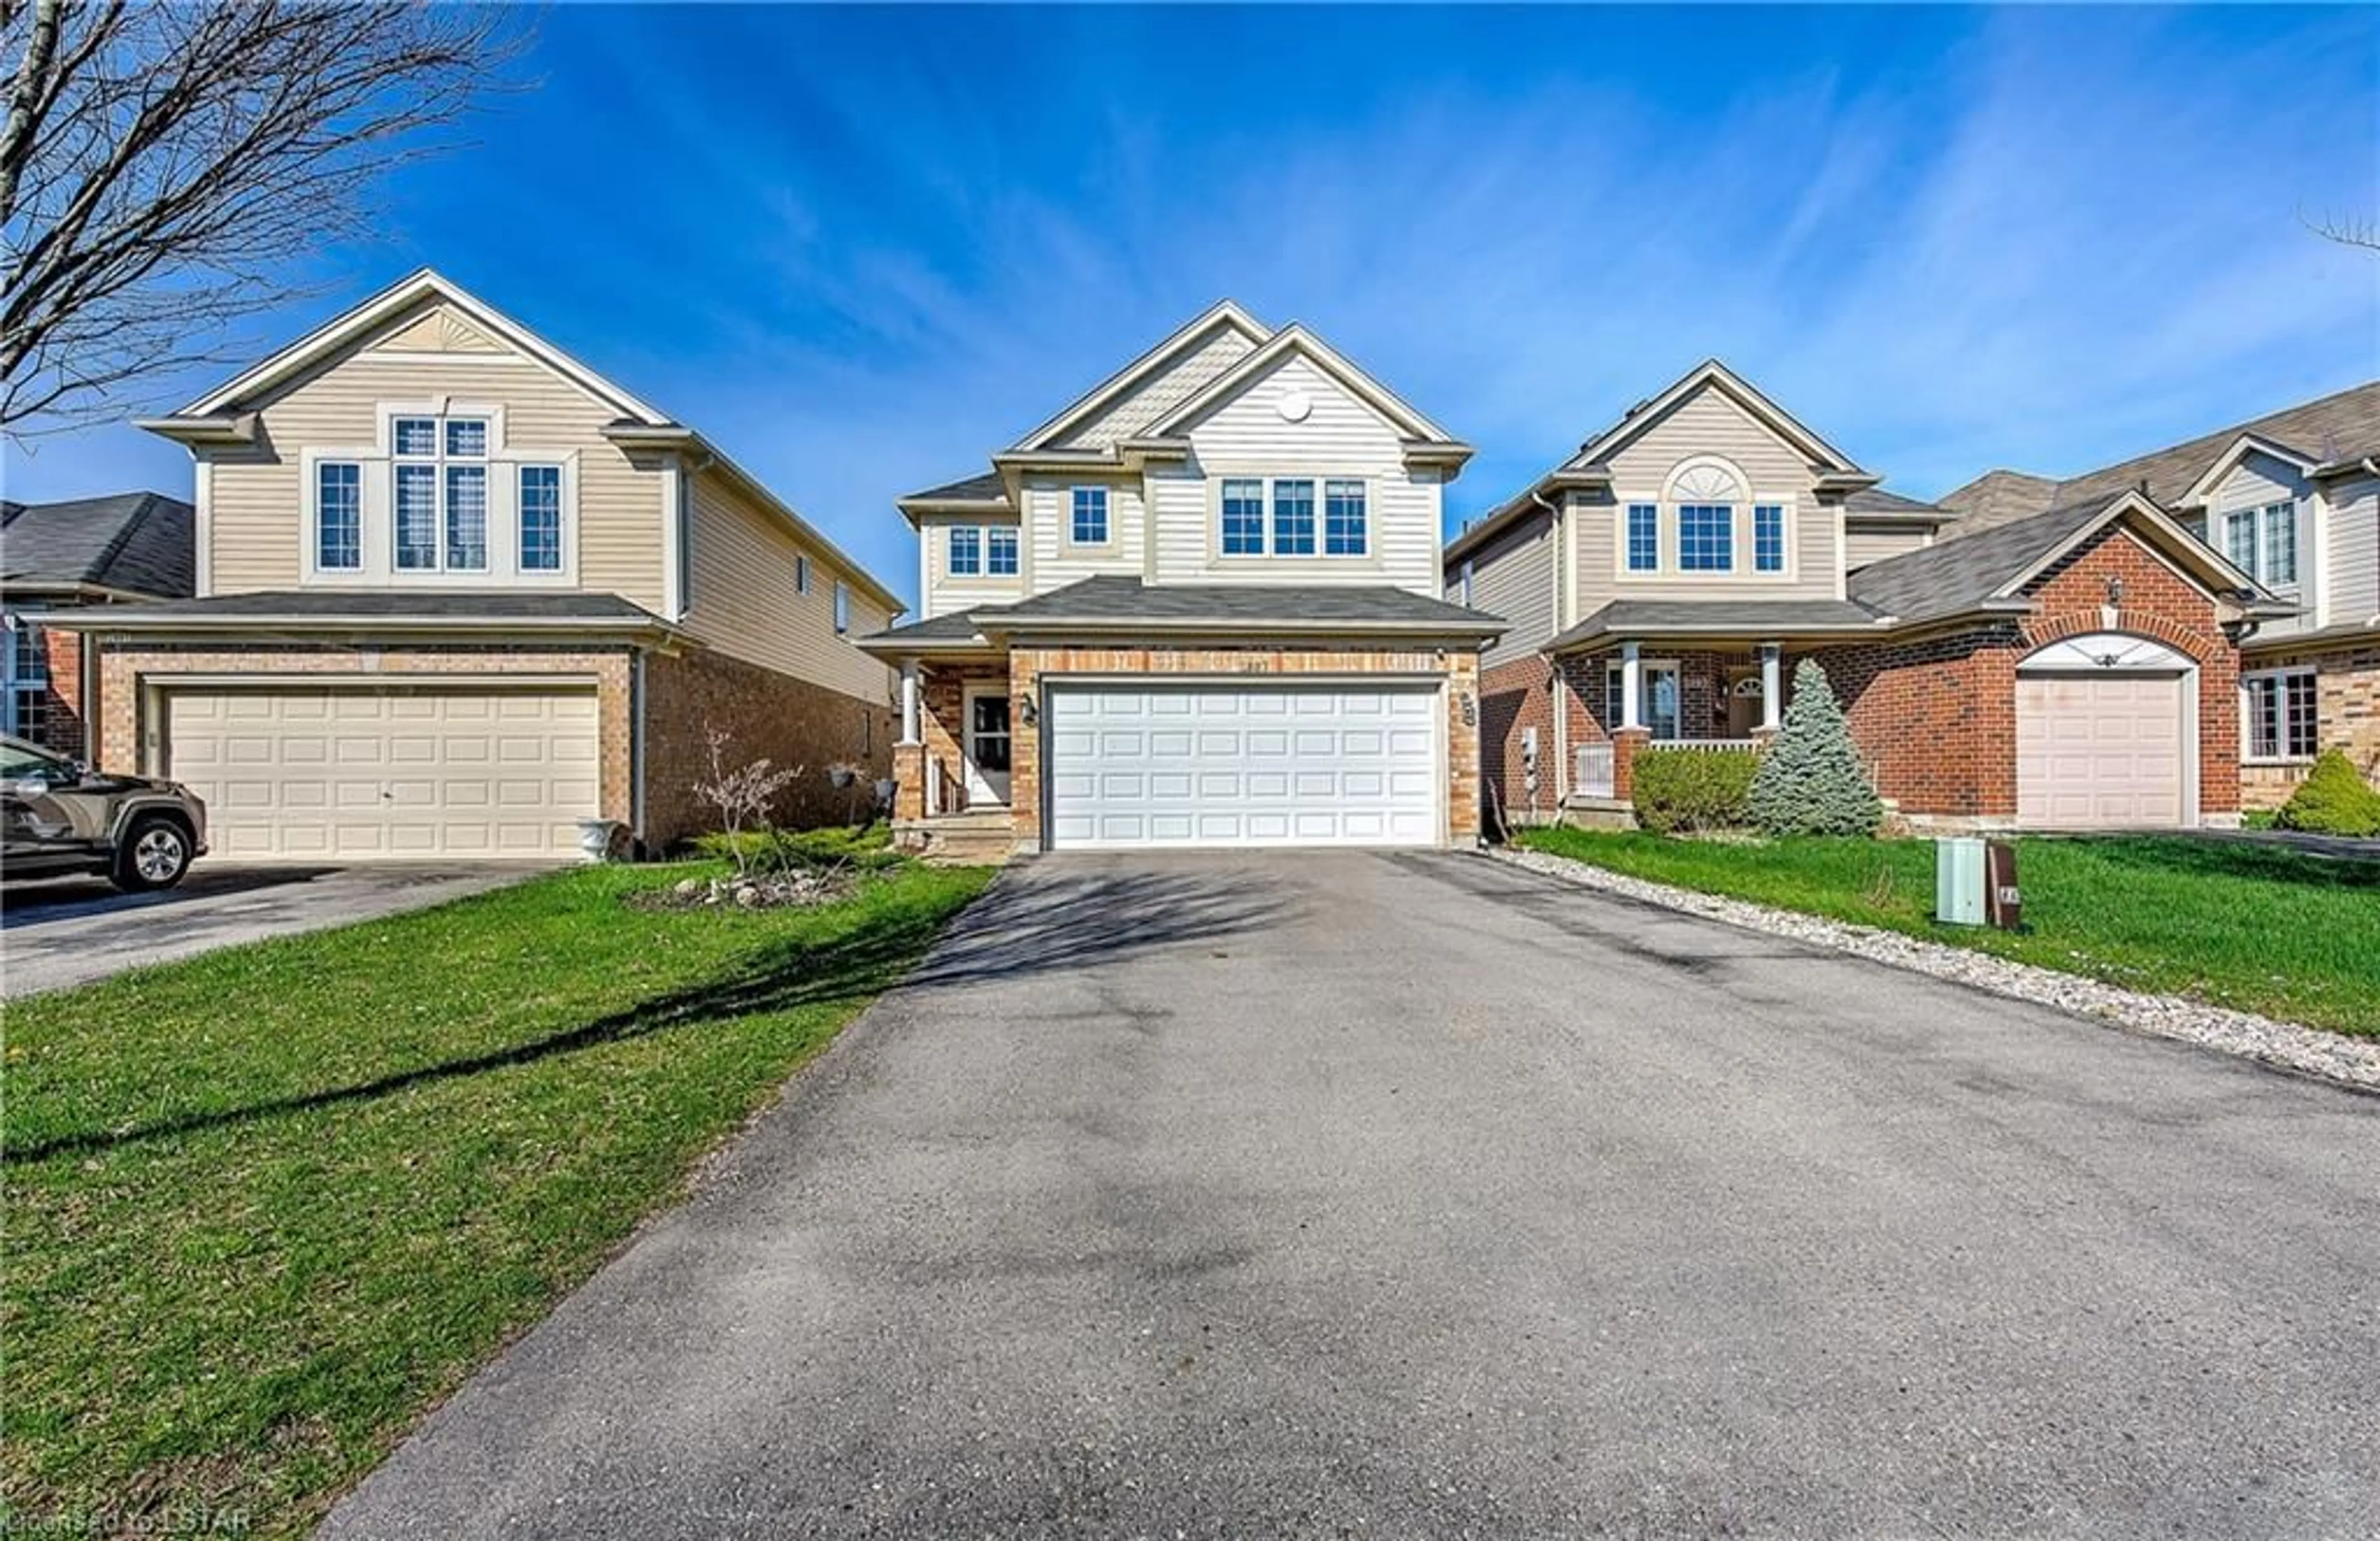 Frontside or backside of a home for 2887 Paulkane Chase, London Ontario N6L 0A8